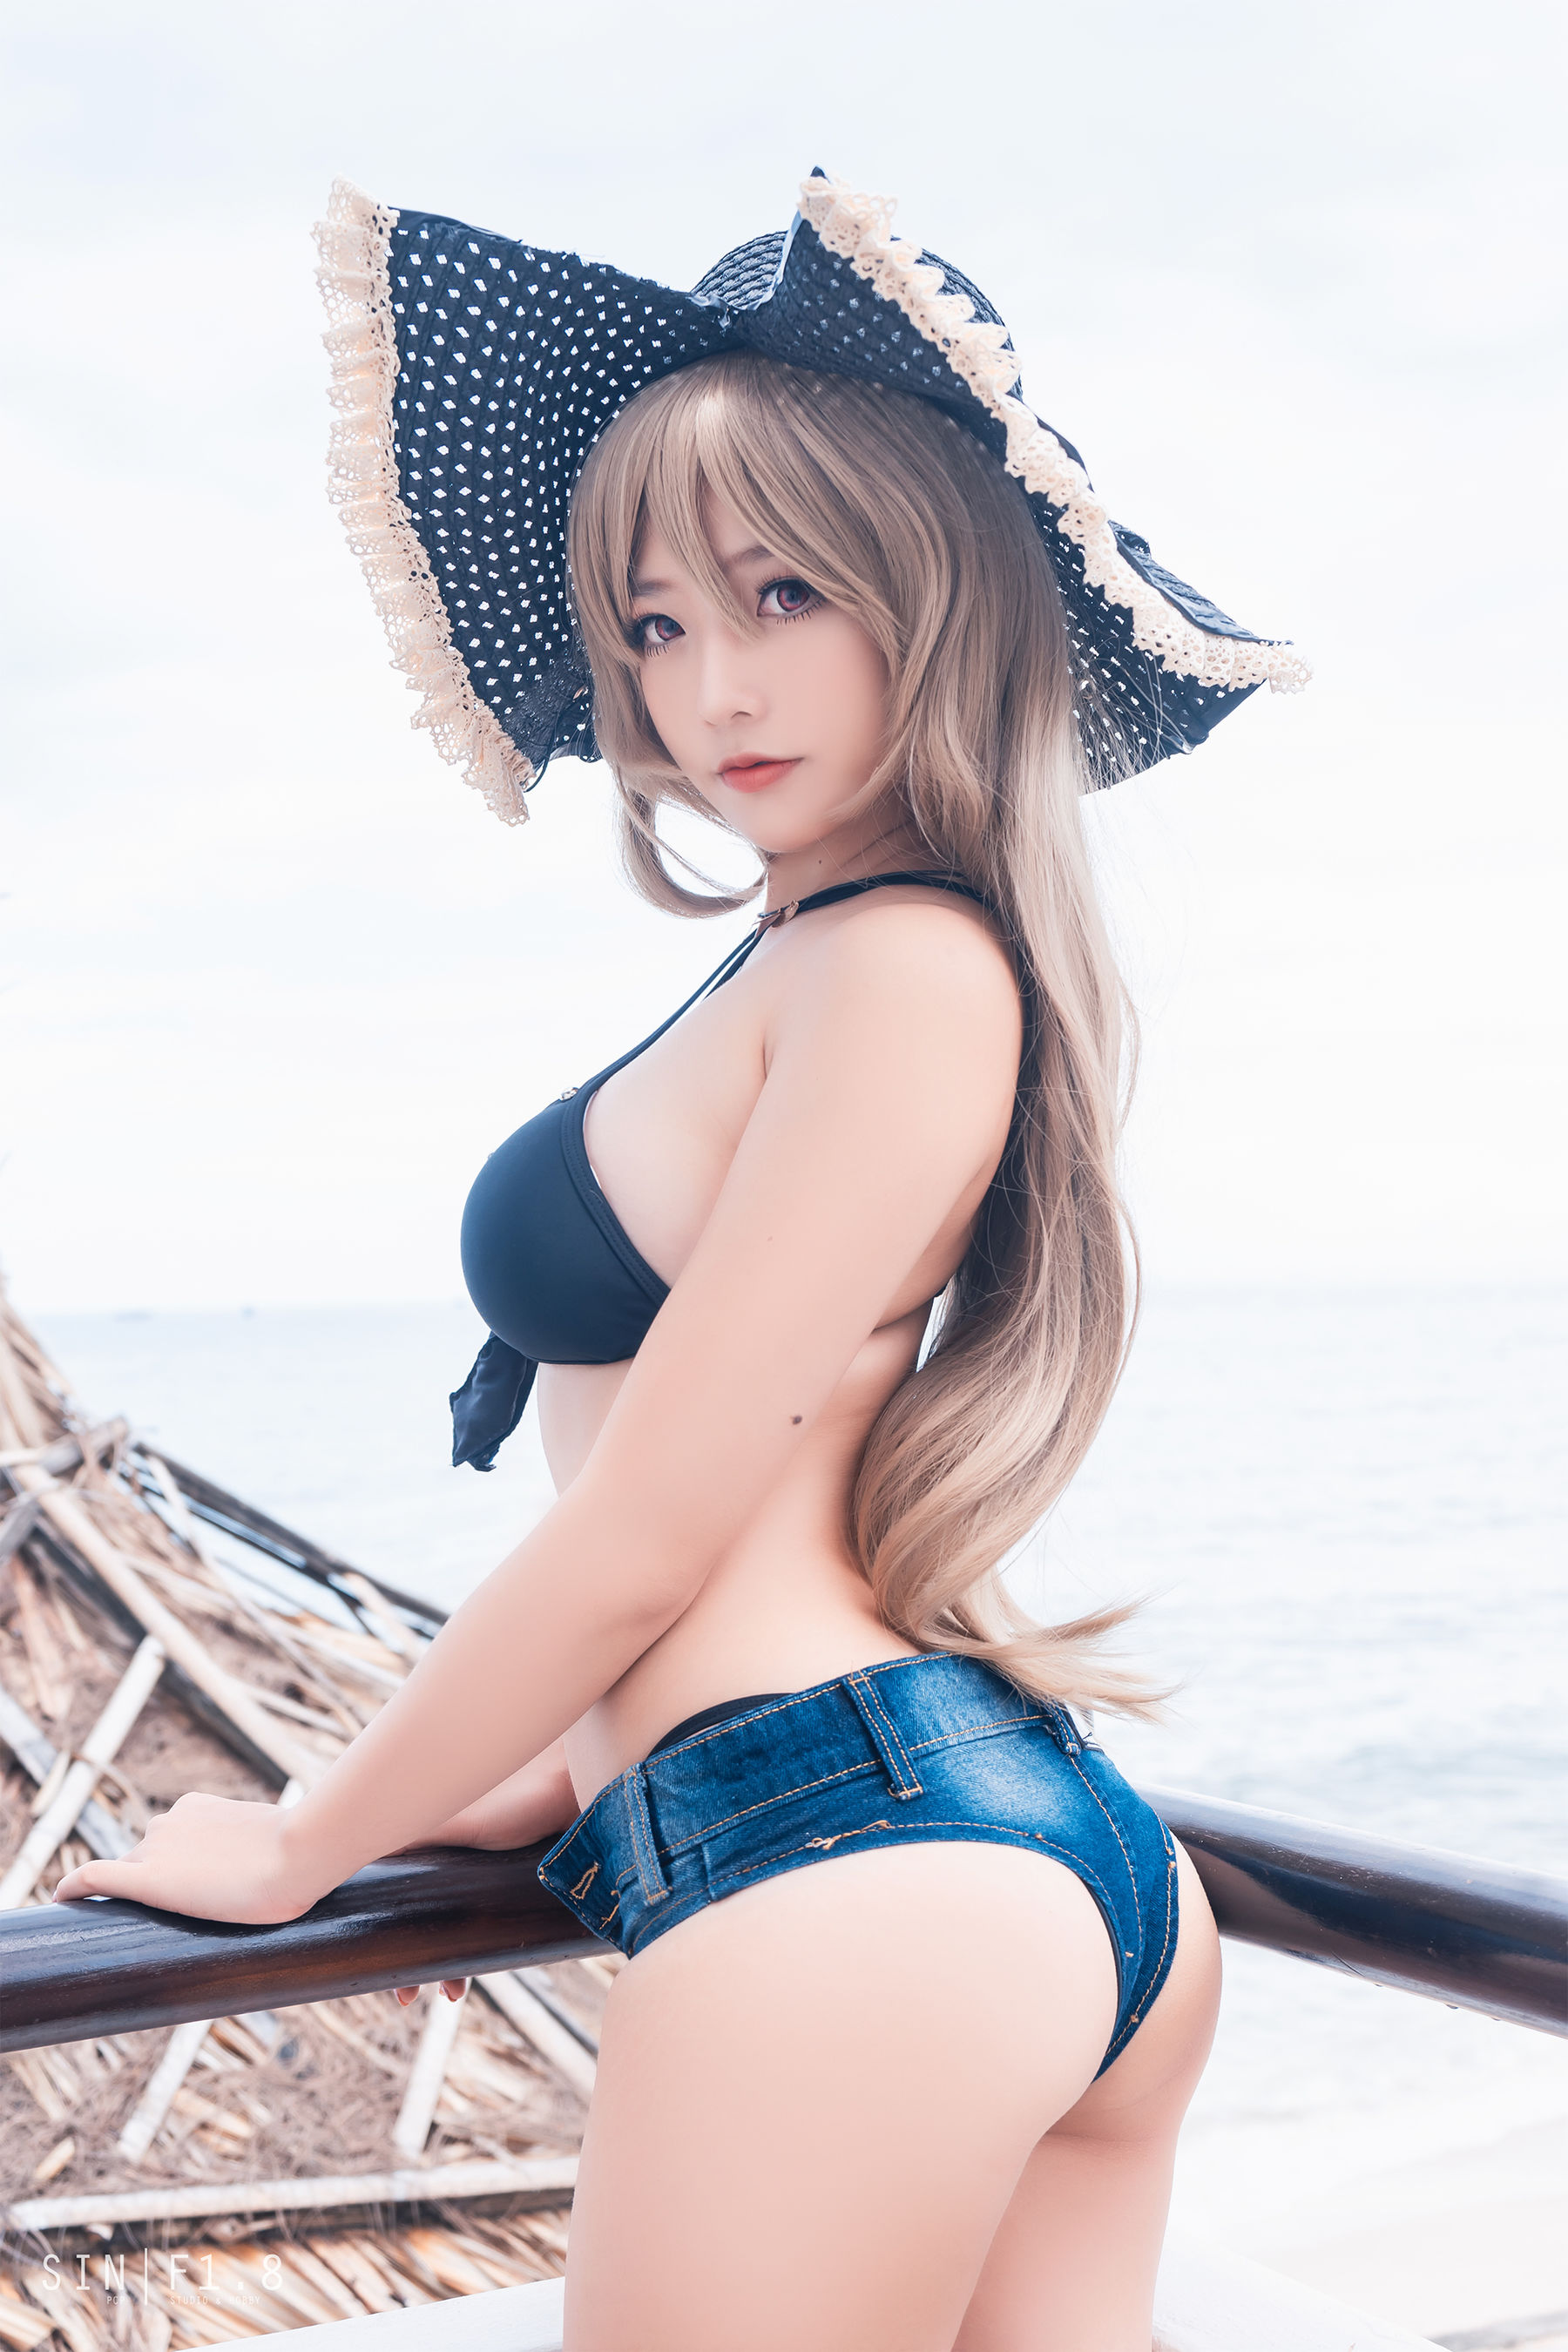 [COS福利] Messie Huang - Jean Bart swimsuit